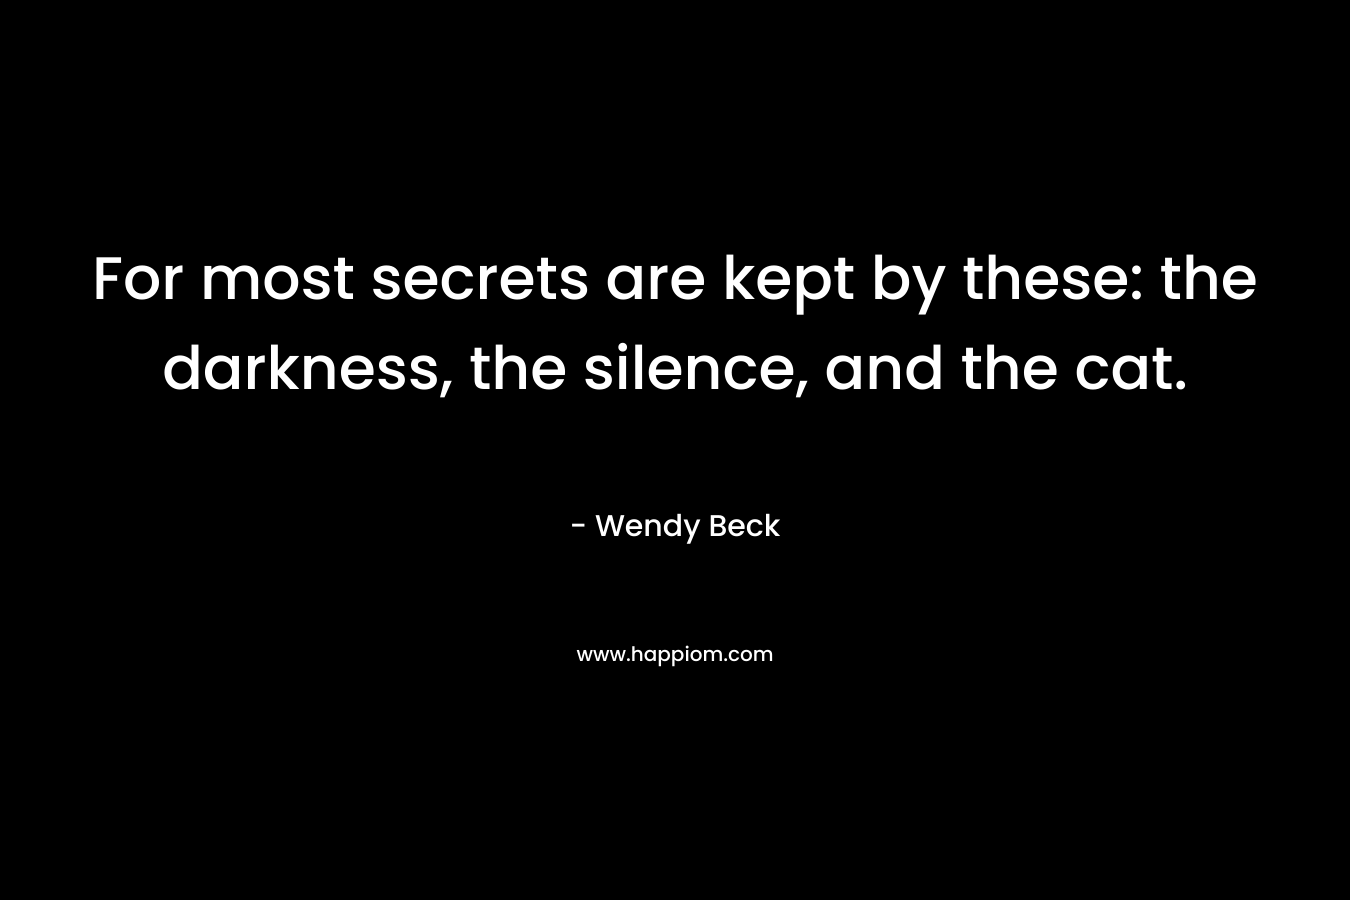 For most secrets are kept by these: the darkness, the silence, and the cat. – Wendy Beck